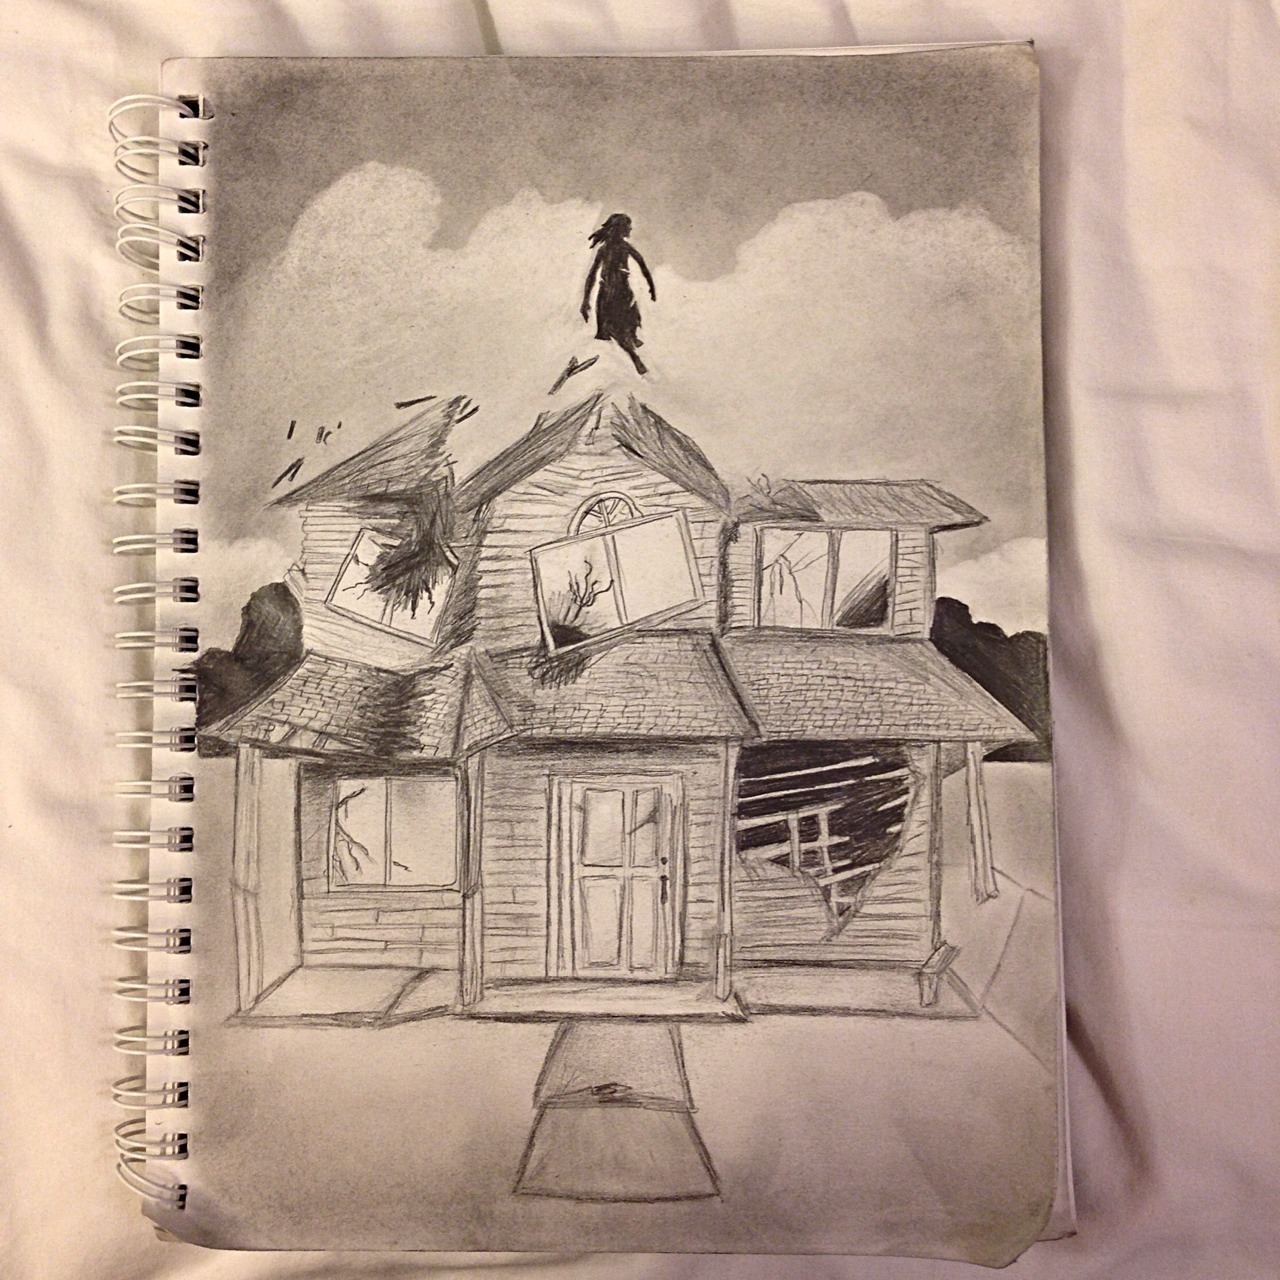 4penguins:  I drew this….it is the cover of Collide with the sky by Pierce the